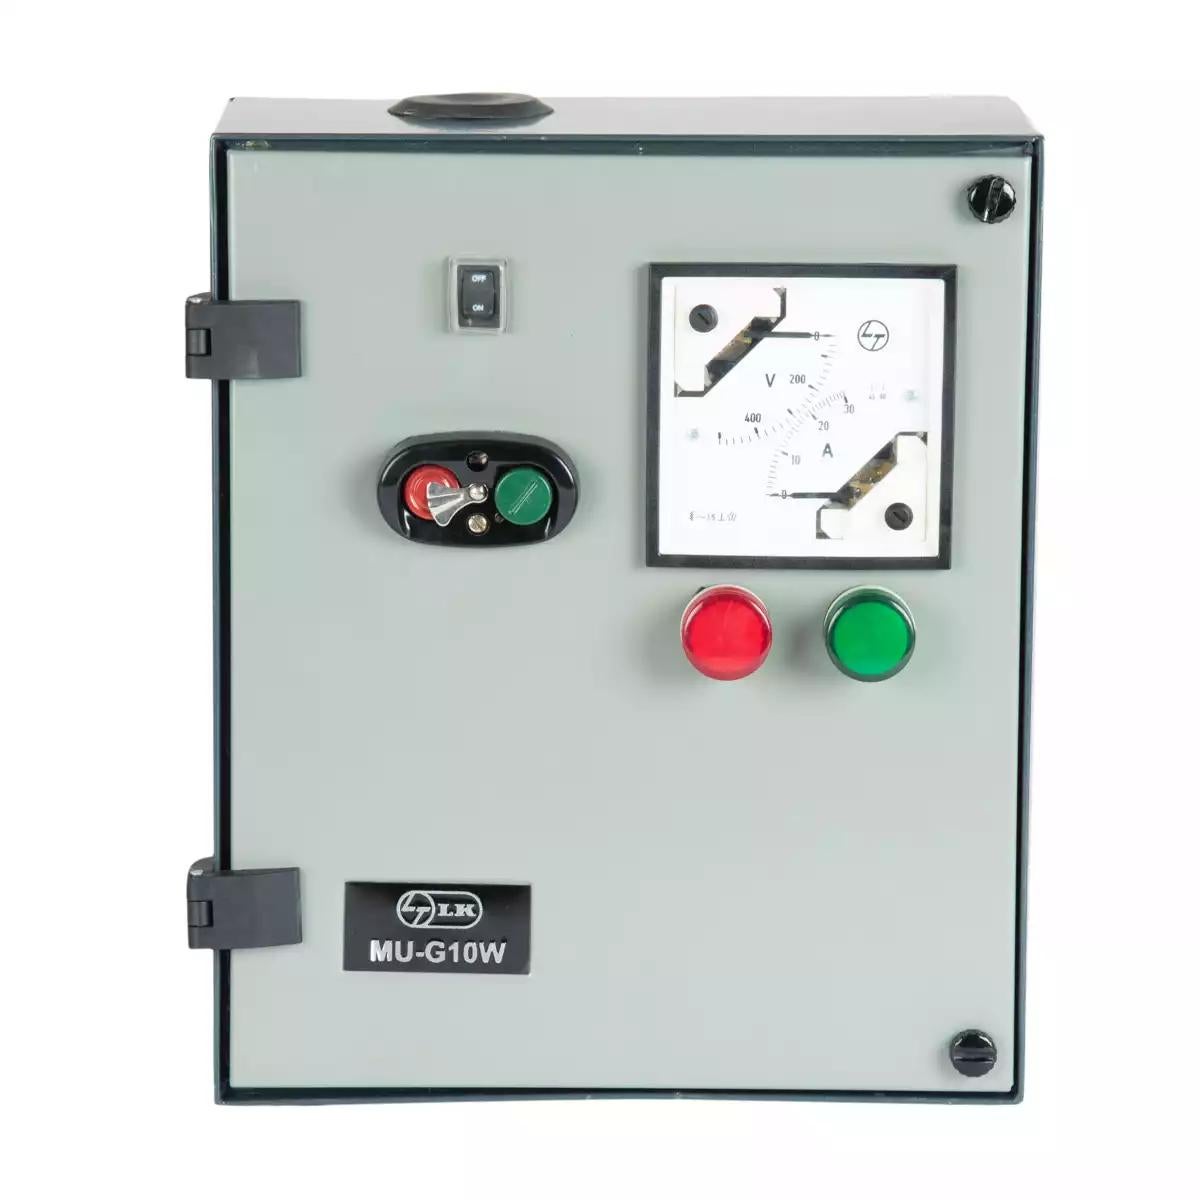 Three Phase DOL Controller with WLC for Submersible Pump Application,MU-G10W,10HP,DOL, CS91037COFO